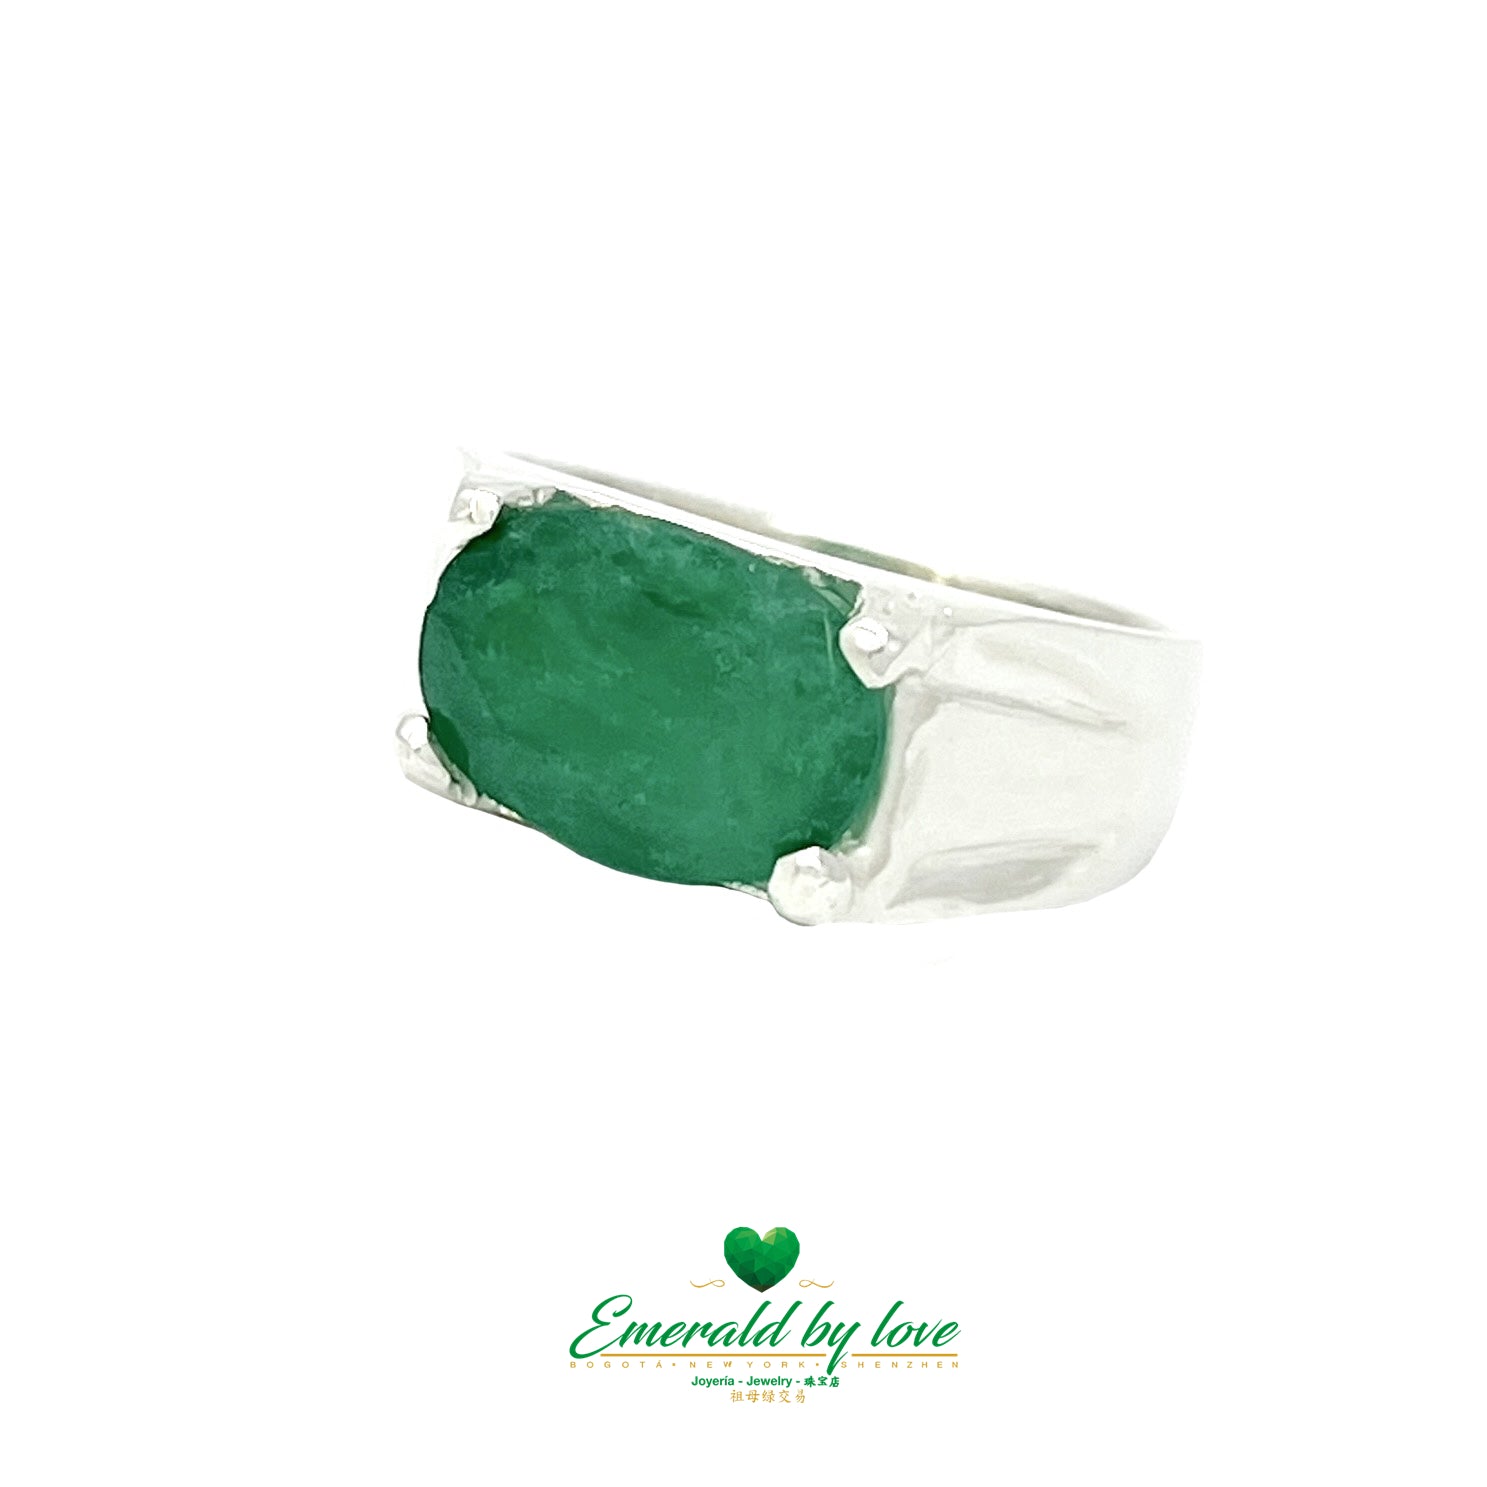 Men's Silver Ring with Large Oval Emerald in Four-Prong Setting